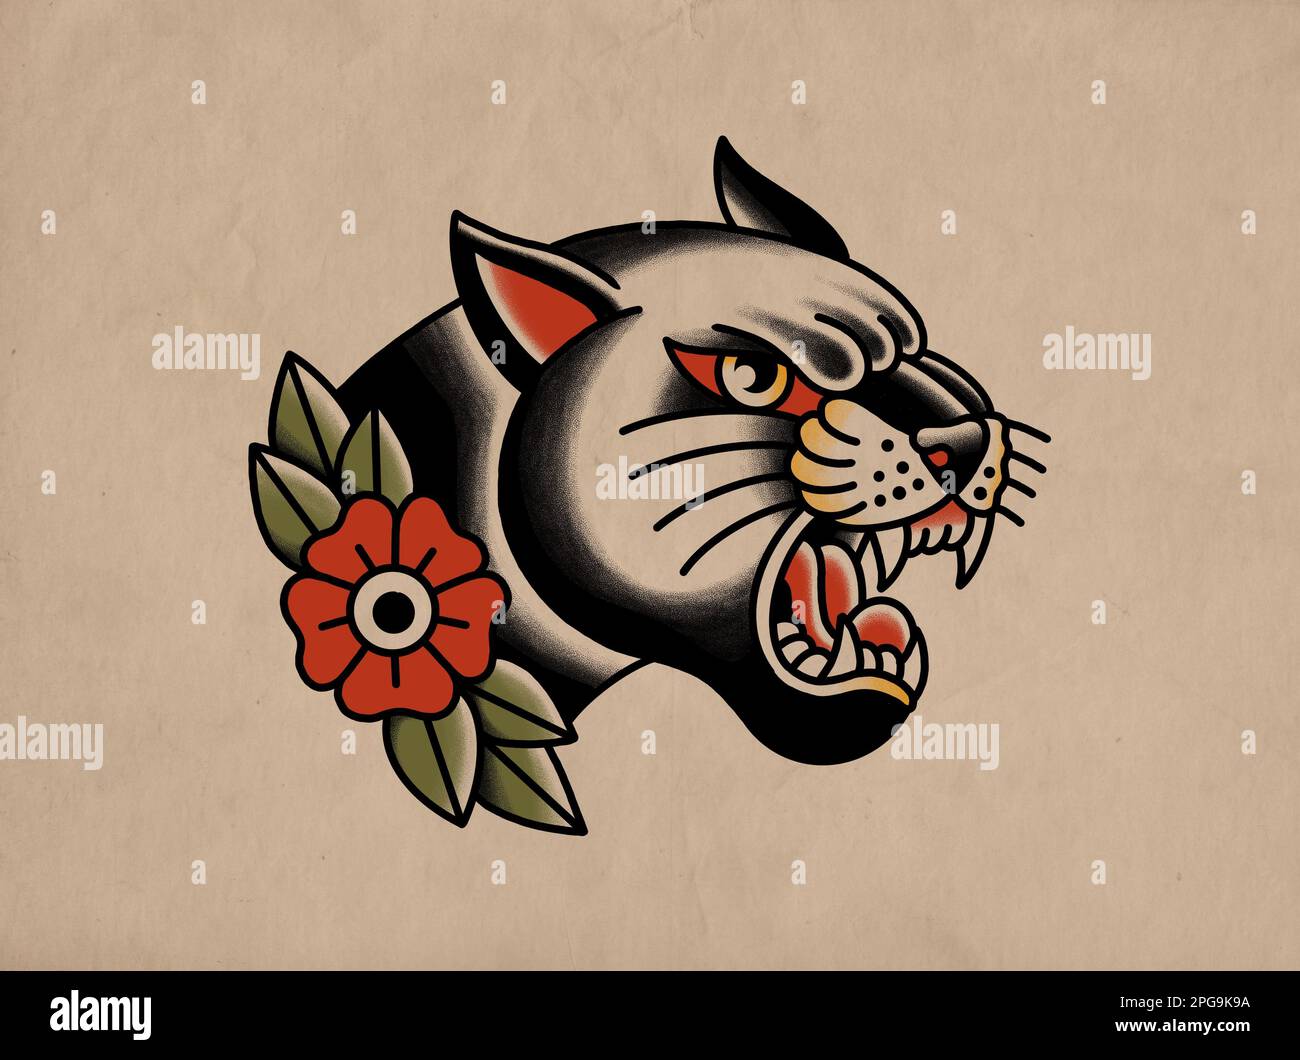 Panther Flash Tattoo Images Browse 334 Stock Photos  Vectors Free  Download with Trial  Shutterstock